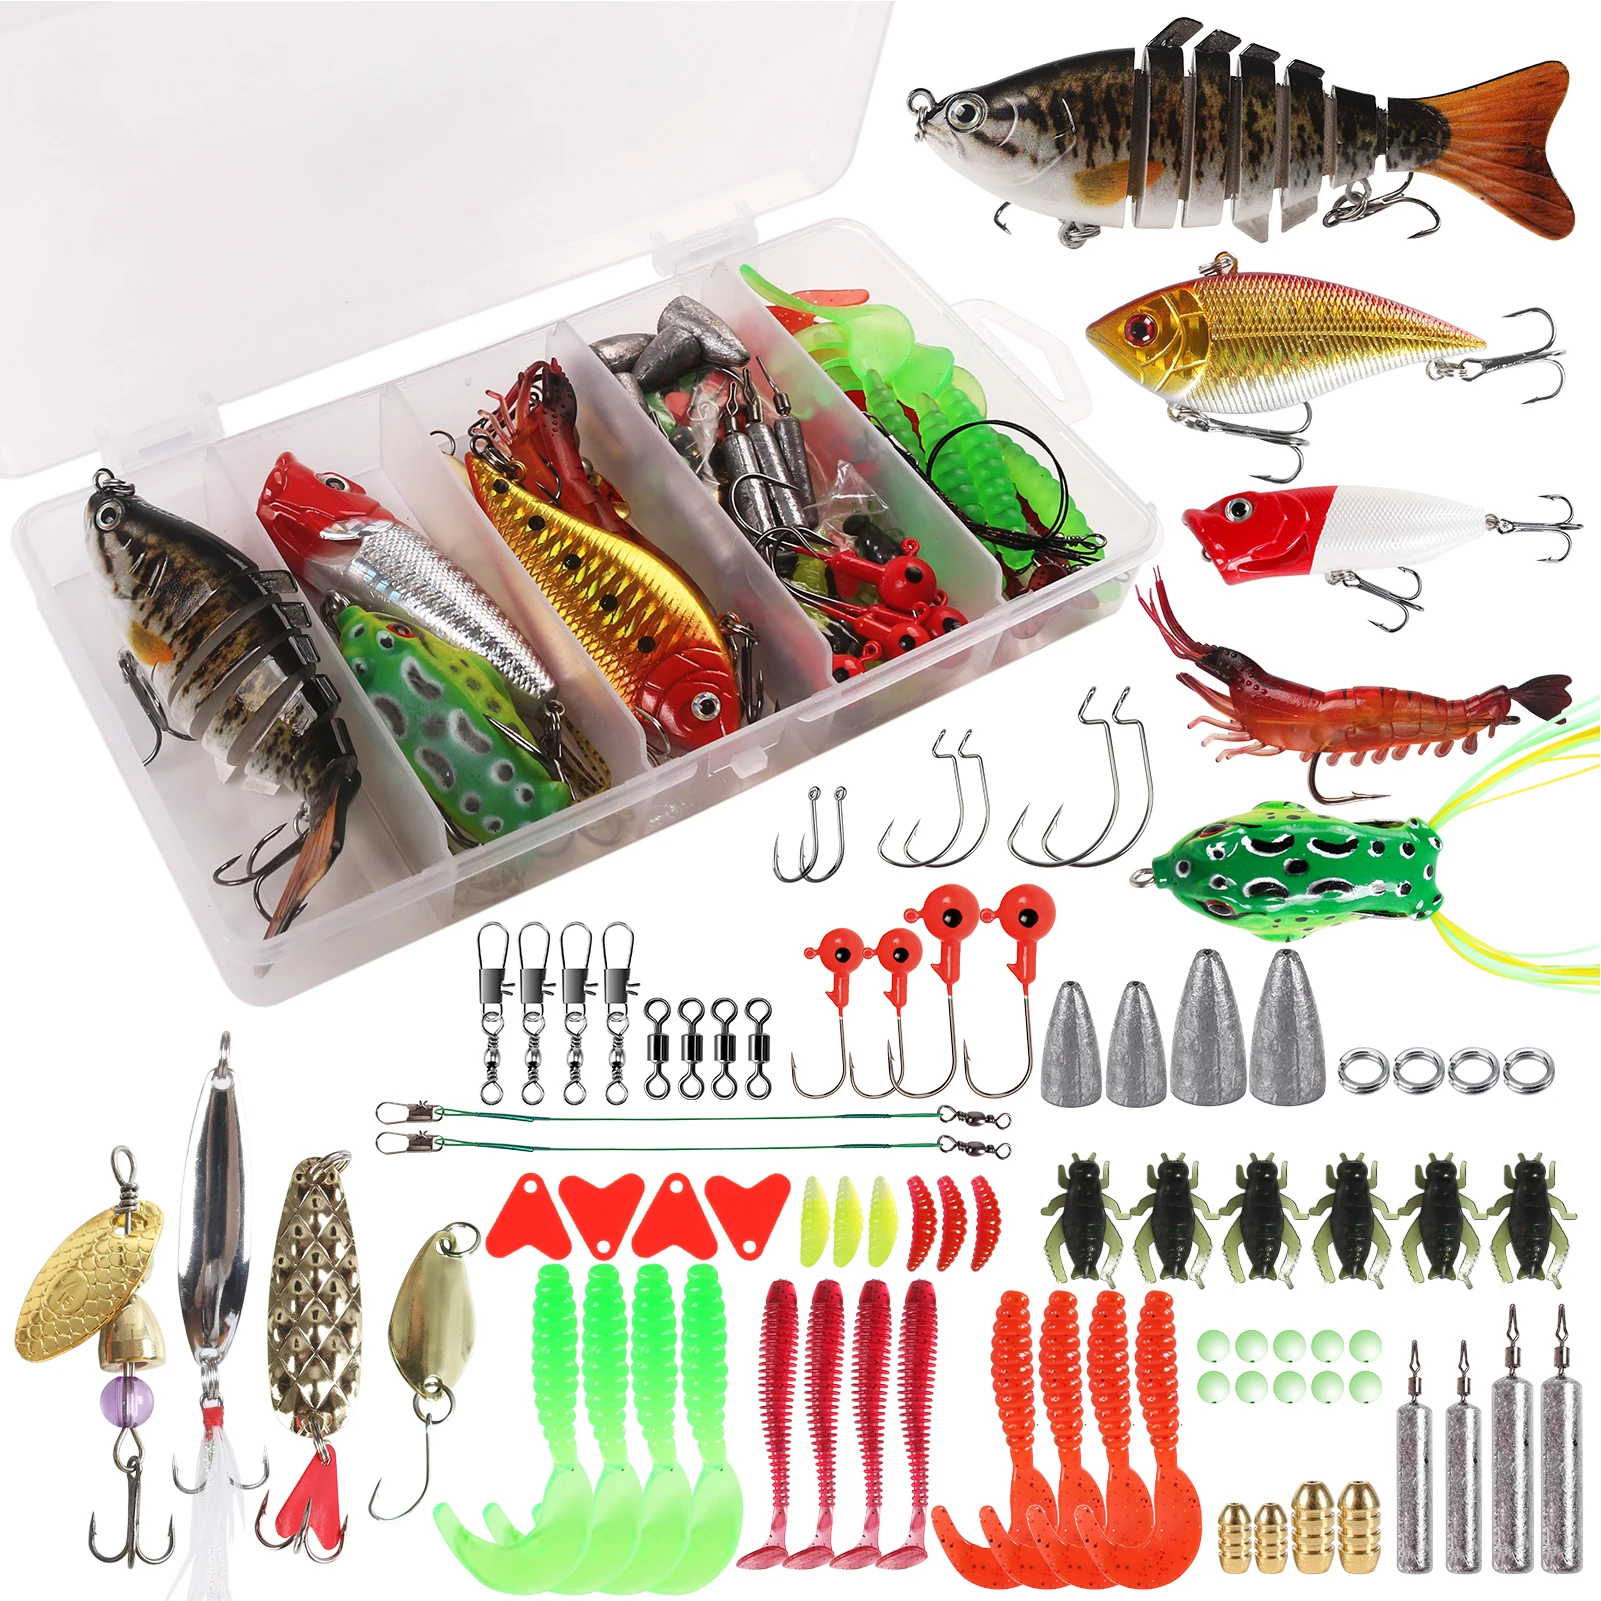 https://ae01.alicdn.com/kf/S116f10c7f8604745b75be842aa454a5aV/83pcs-Fishing-Lures-Kit-for-Bass-Trout-Salmon-Fishing-Accessories-Tackle-Tool-Fishing-Baits-Swivels-Hooks.jpg